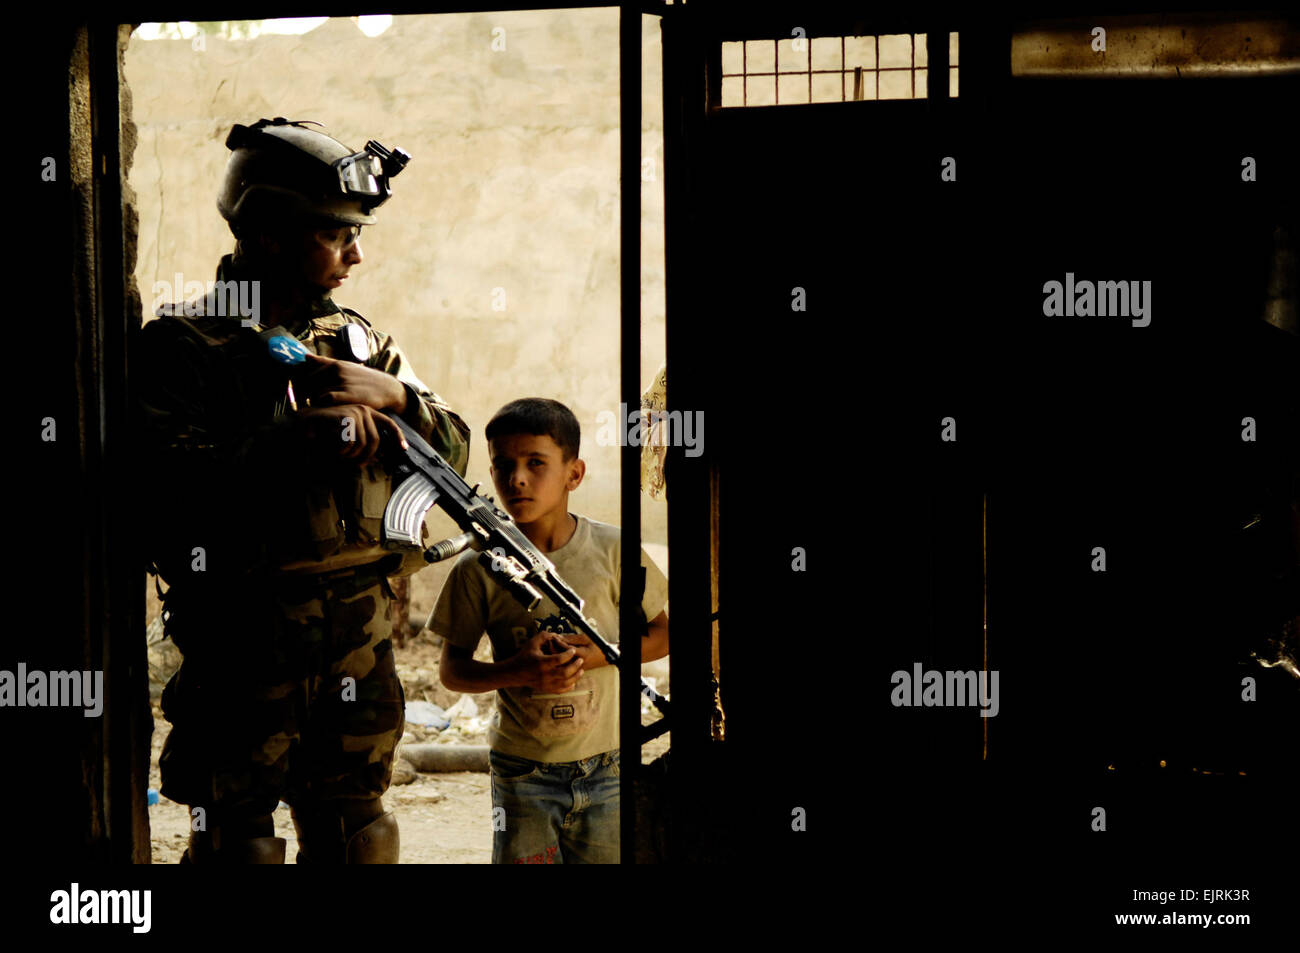 An Iraqi Army Soldier looks down at a boy as he watches U.S. Soldiers and Iraqi soldiers search a building during a joint patrol in Shulla, Iraq, June 19, 2008. The U.S. Soldiers are assigned to 3rd Platoon, Bravo Company, 2nd Brigade, 502nd Infantry Regiment.  Staff Sgt. Manuel J. Martinez Stock Photo